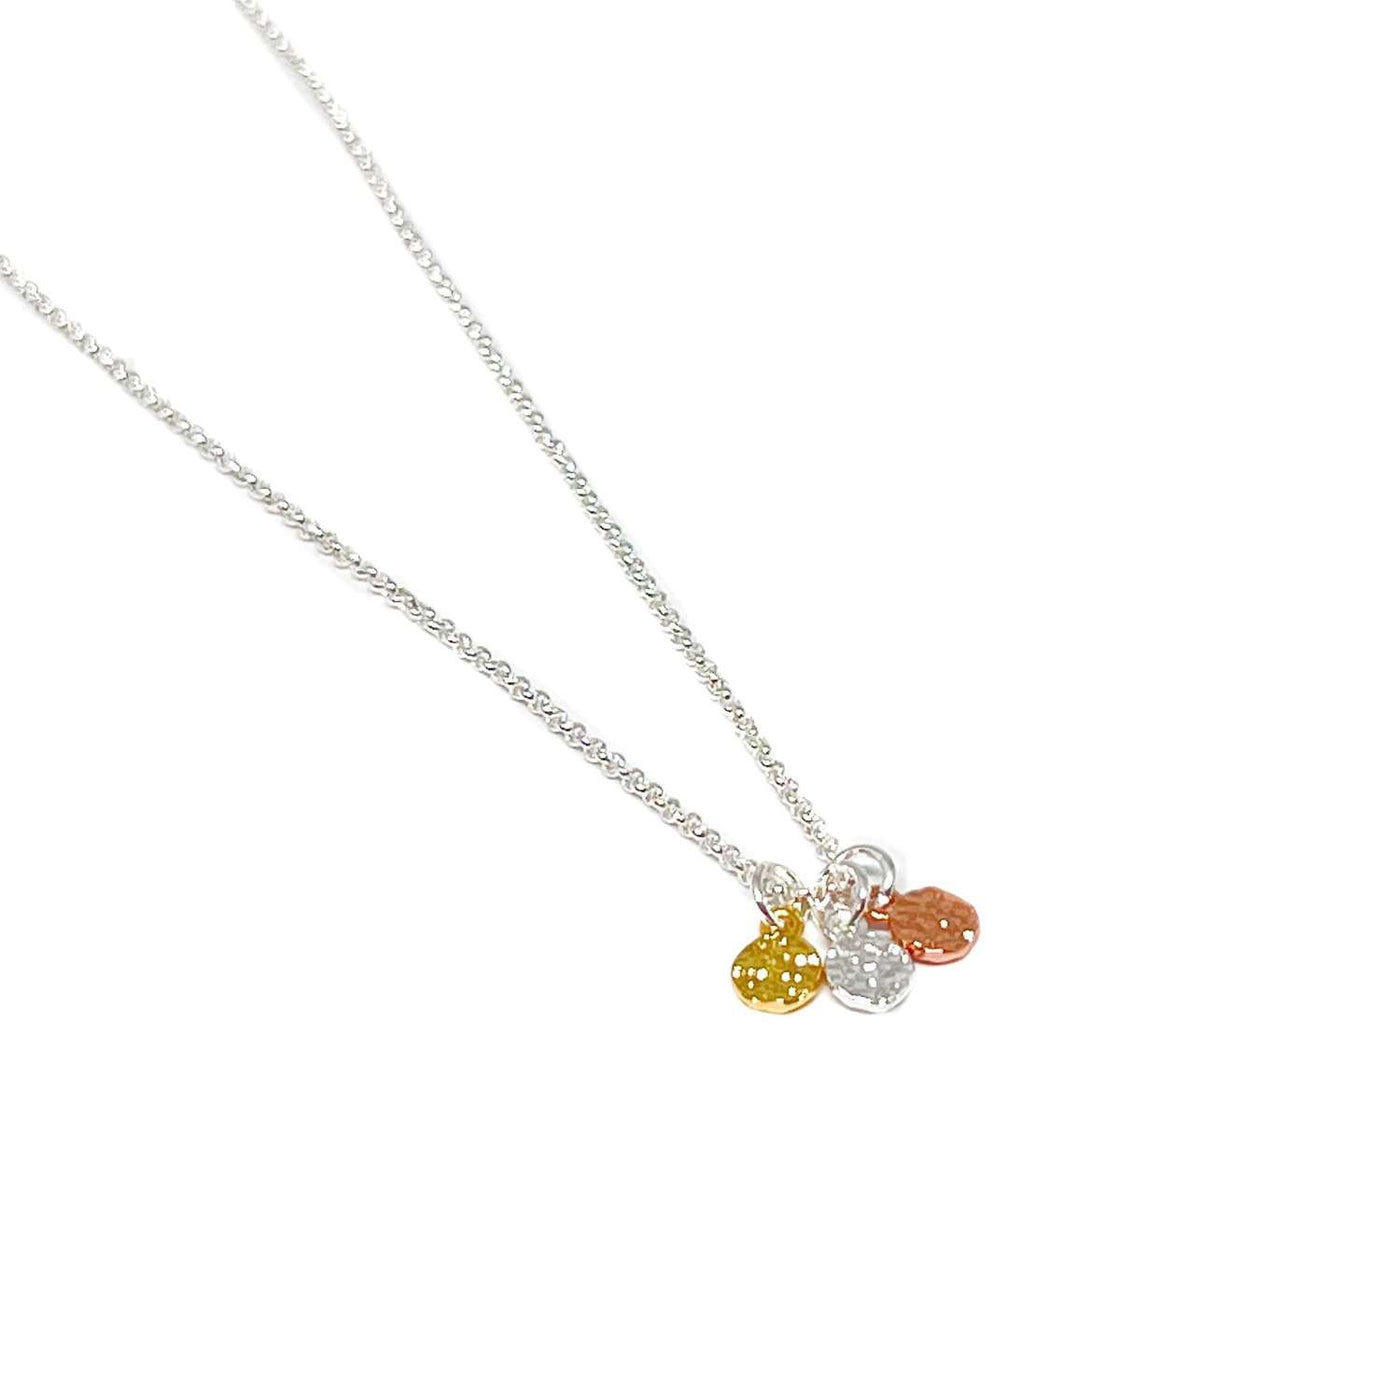 Mimi Triple Mini Disc Necklace - Mixed Metals- Clementine Jewellery